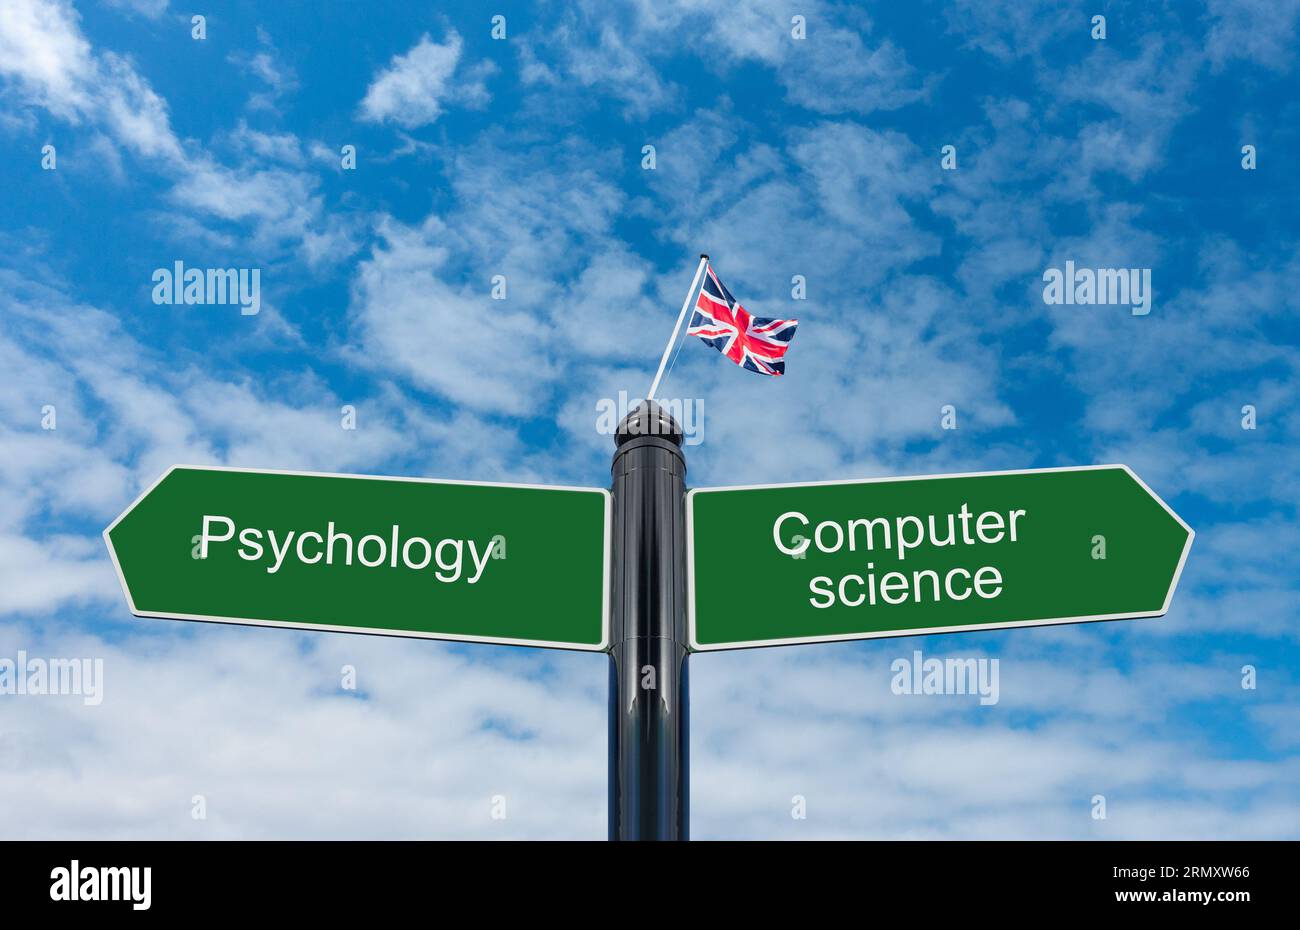 Degree courses, university, education, student loan cost... Psychology and Computer Science two of the most popular Stock Photo